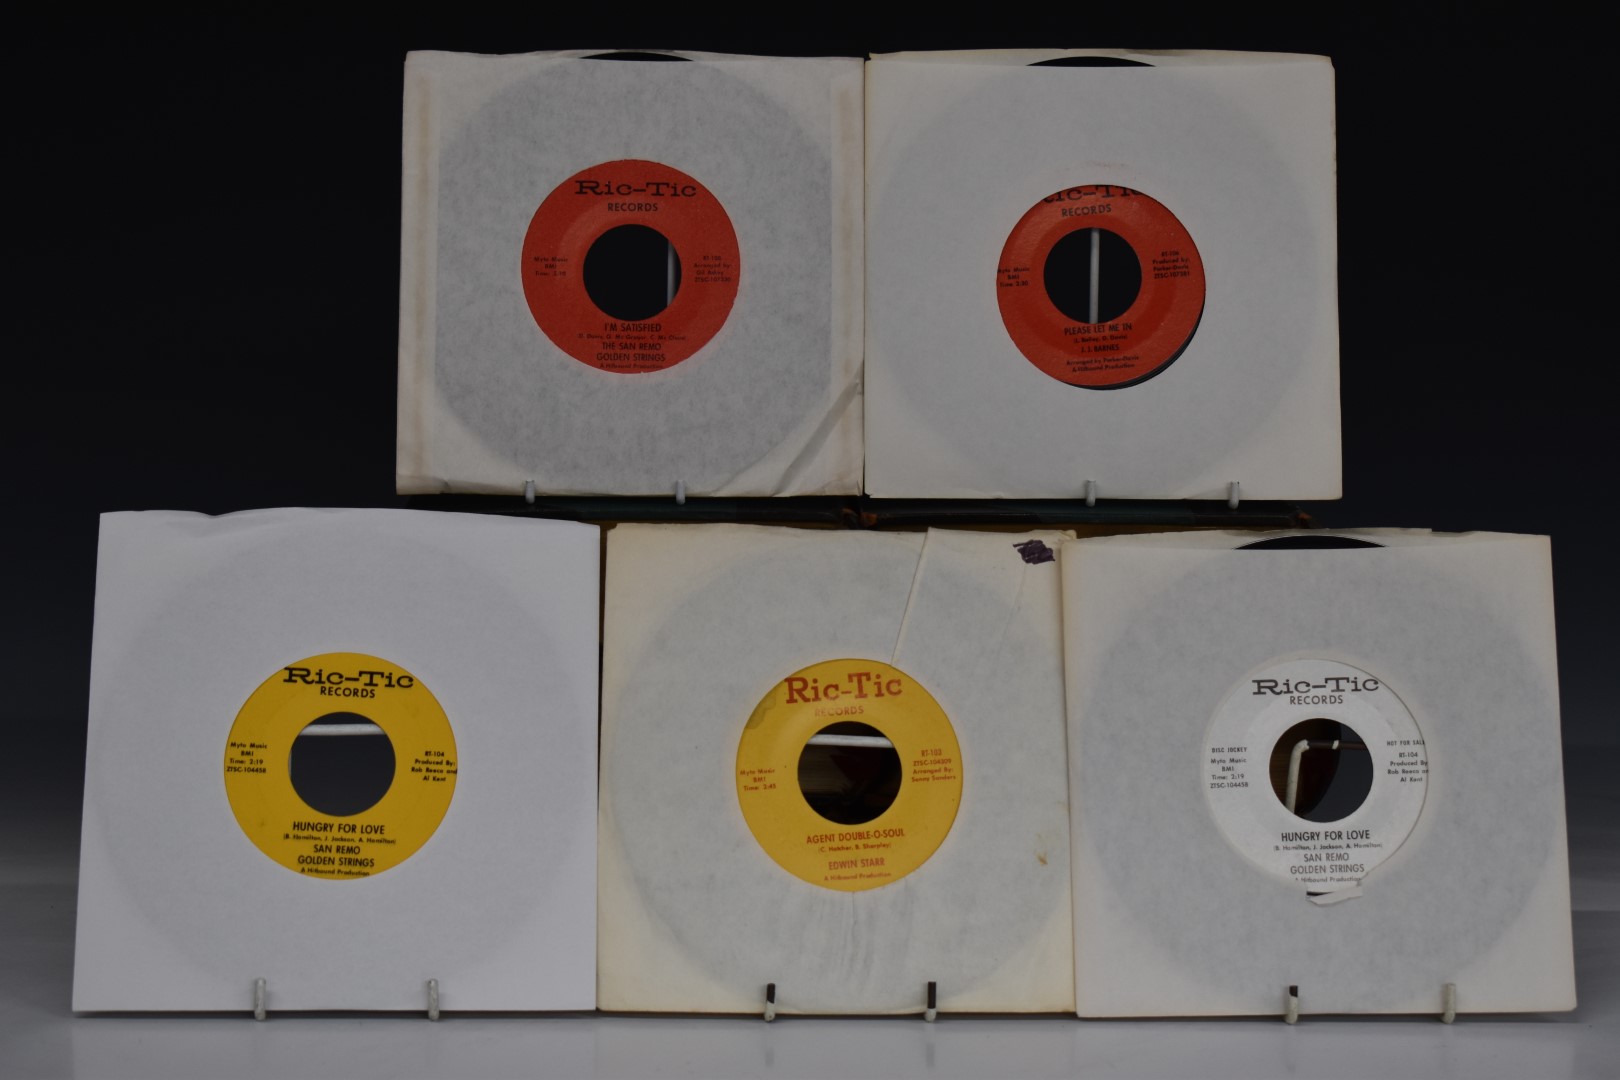 Ric-Tic - 8 Singles on Ric-Tic including Edwin Starr - Agent Double -O- Soul (RT103), San Remo